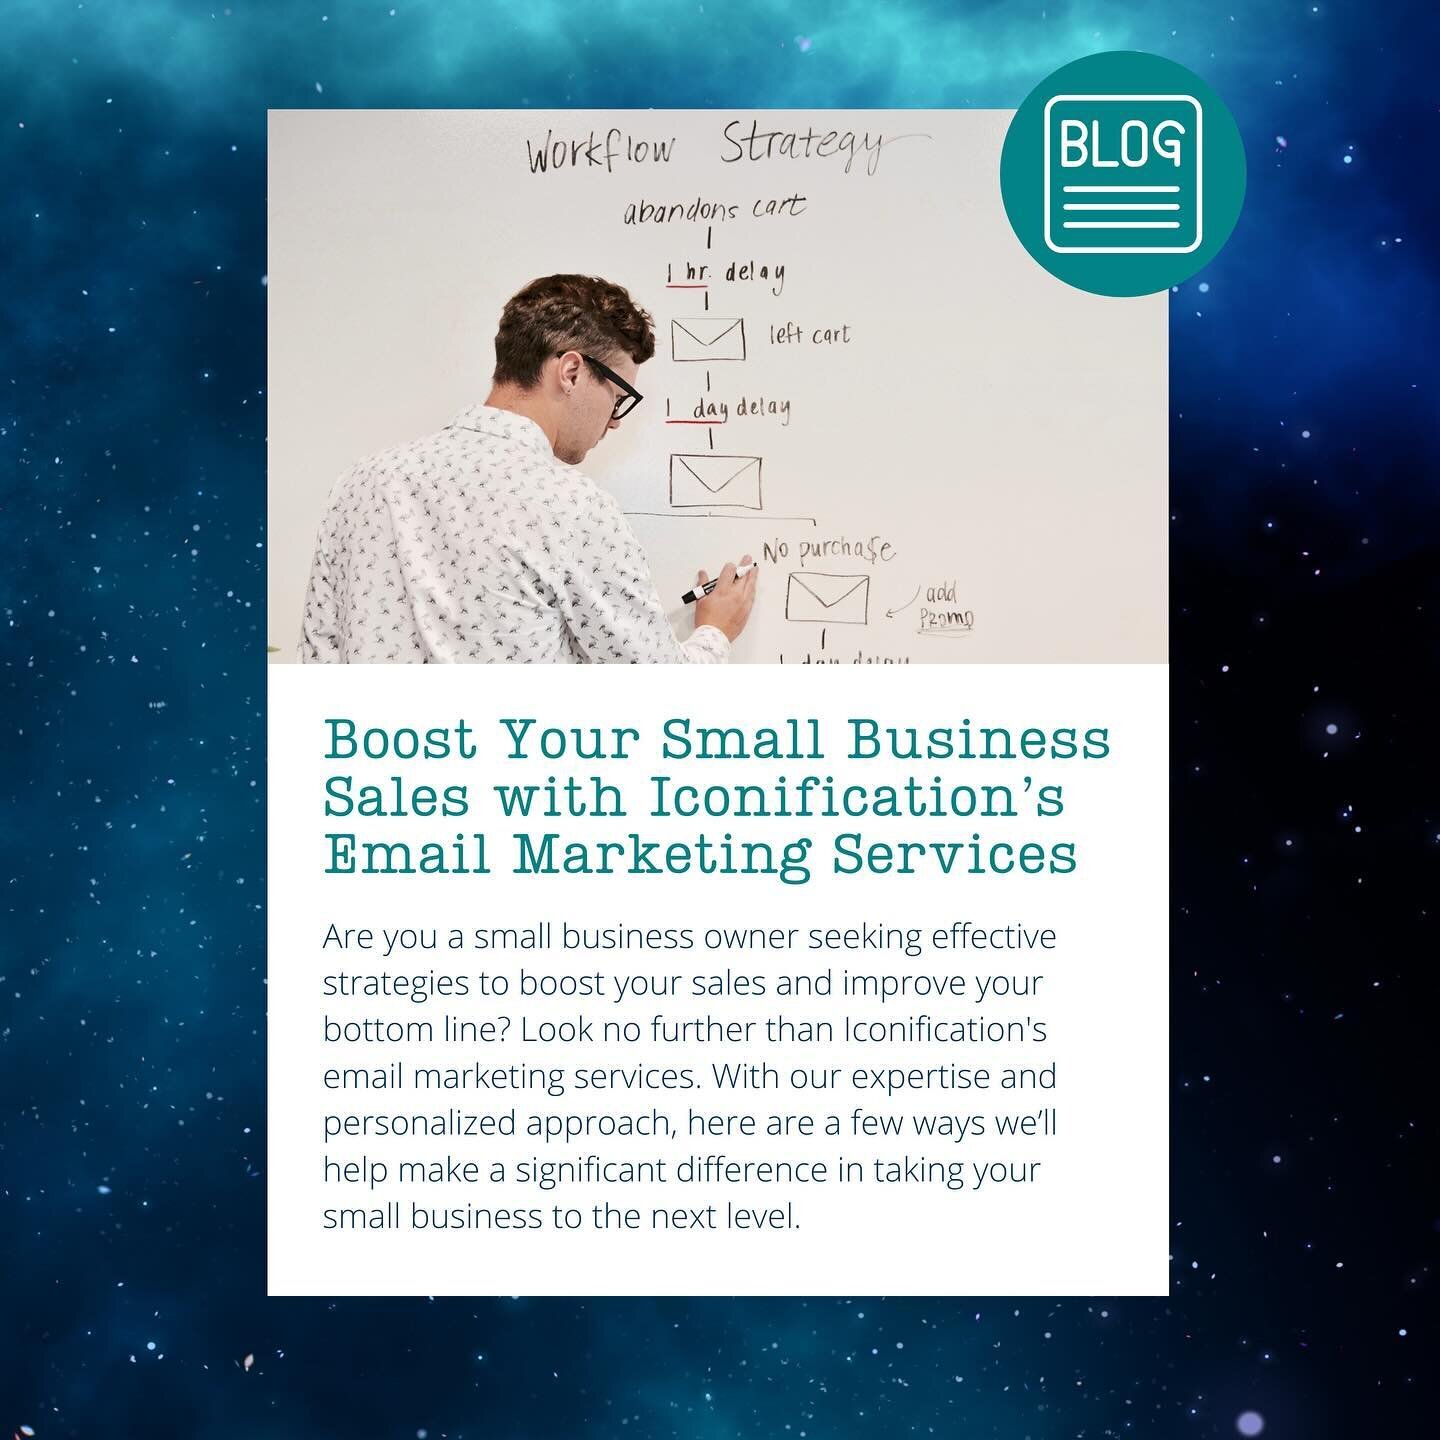 Are you leveraging the power of email marketing to grow your bottom line? 

Comment HELP to get a link to our latest blog &ldquo;Boost Your Small Business Sales with Iconification&rsquo;s Email Marketing Services&rdquo; ⤵️

#squarespace #websitedevel